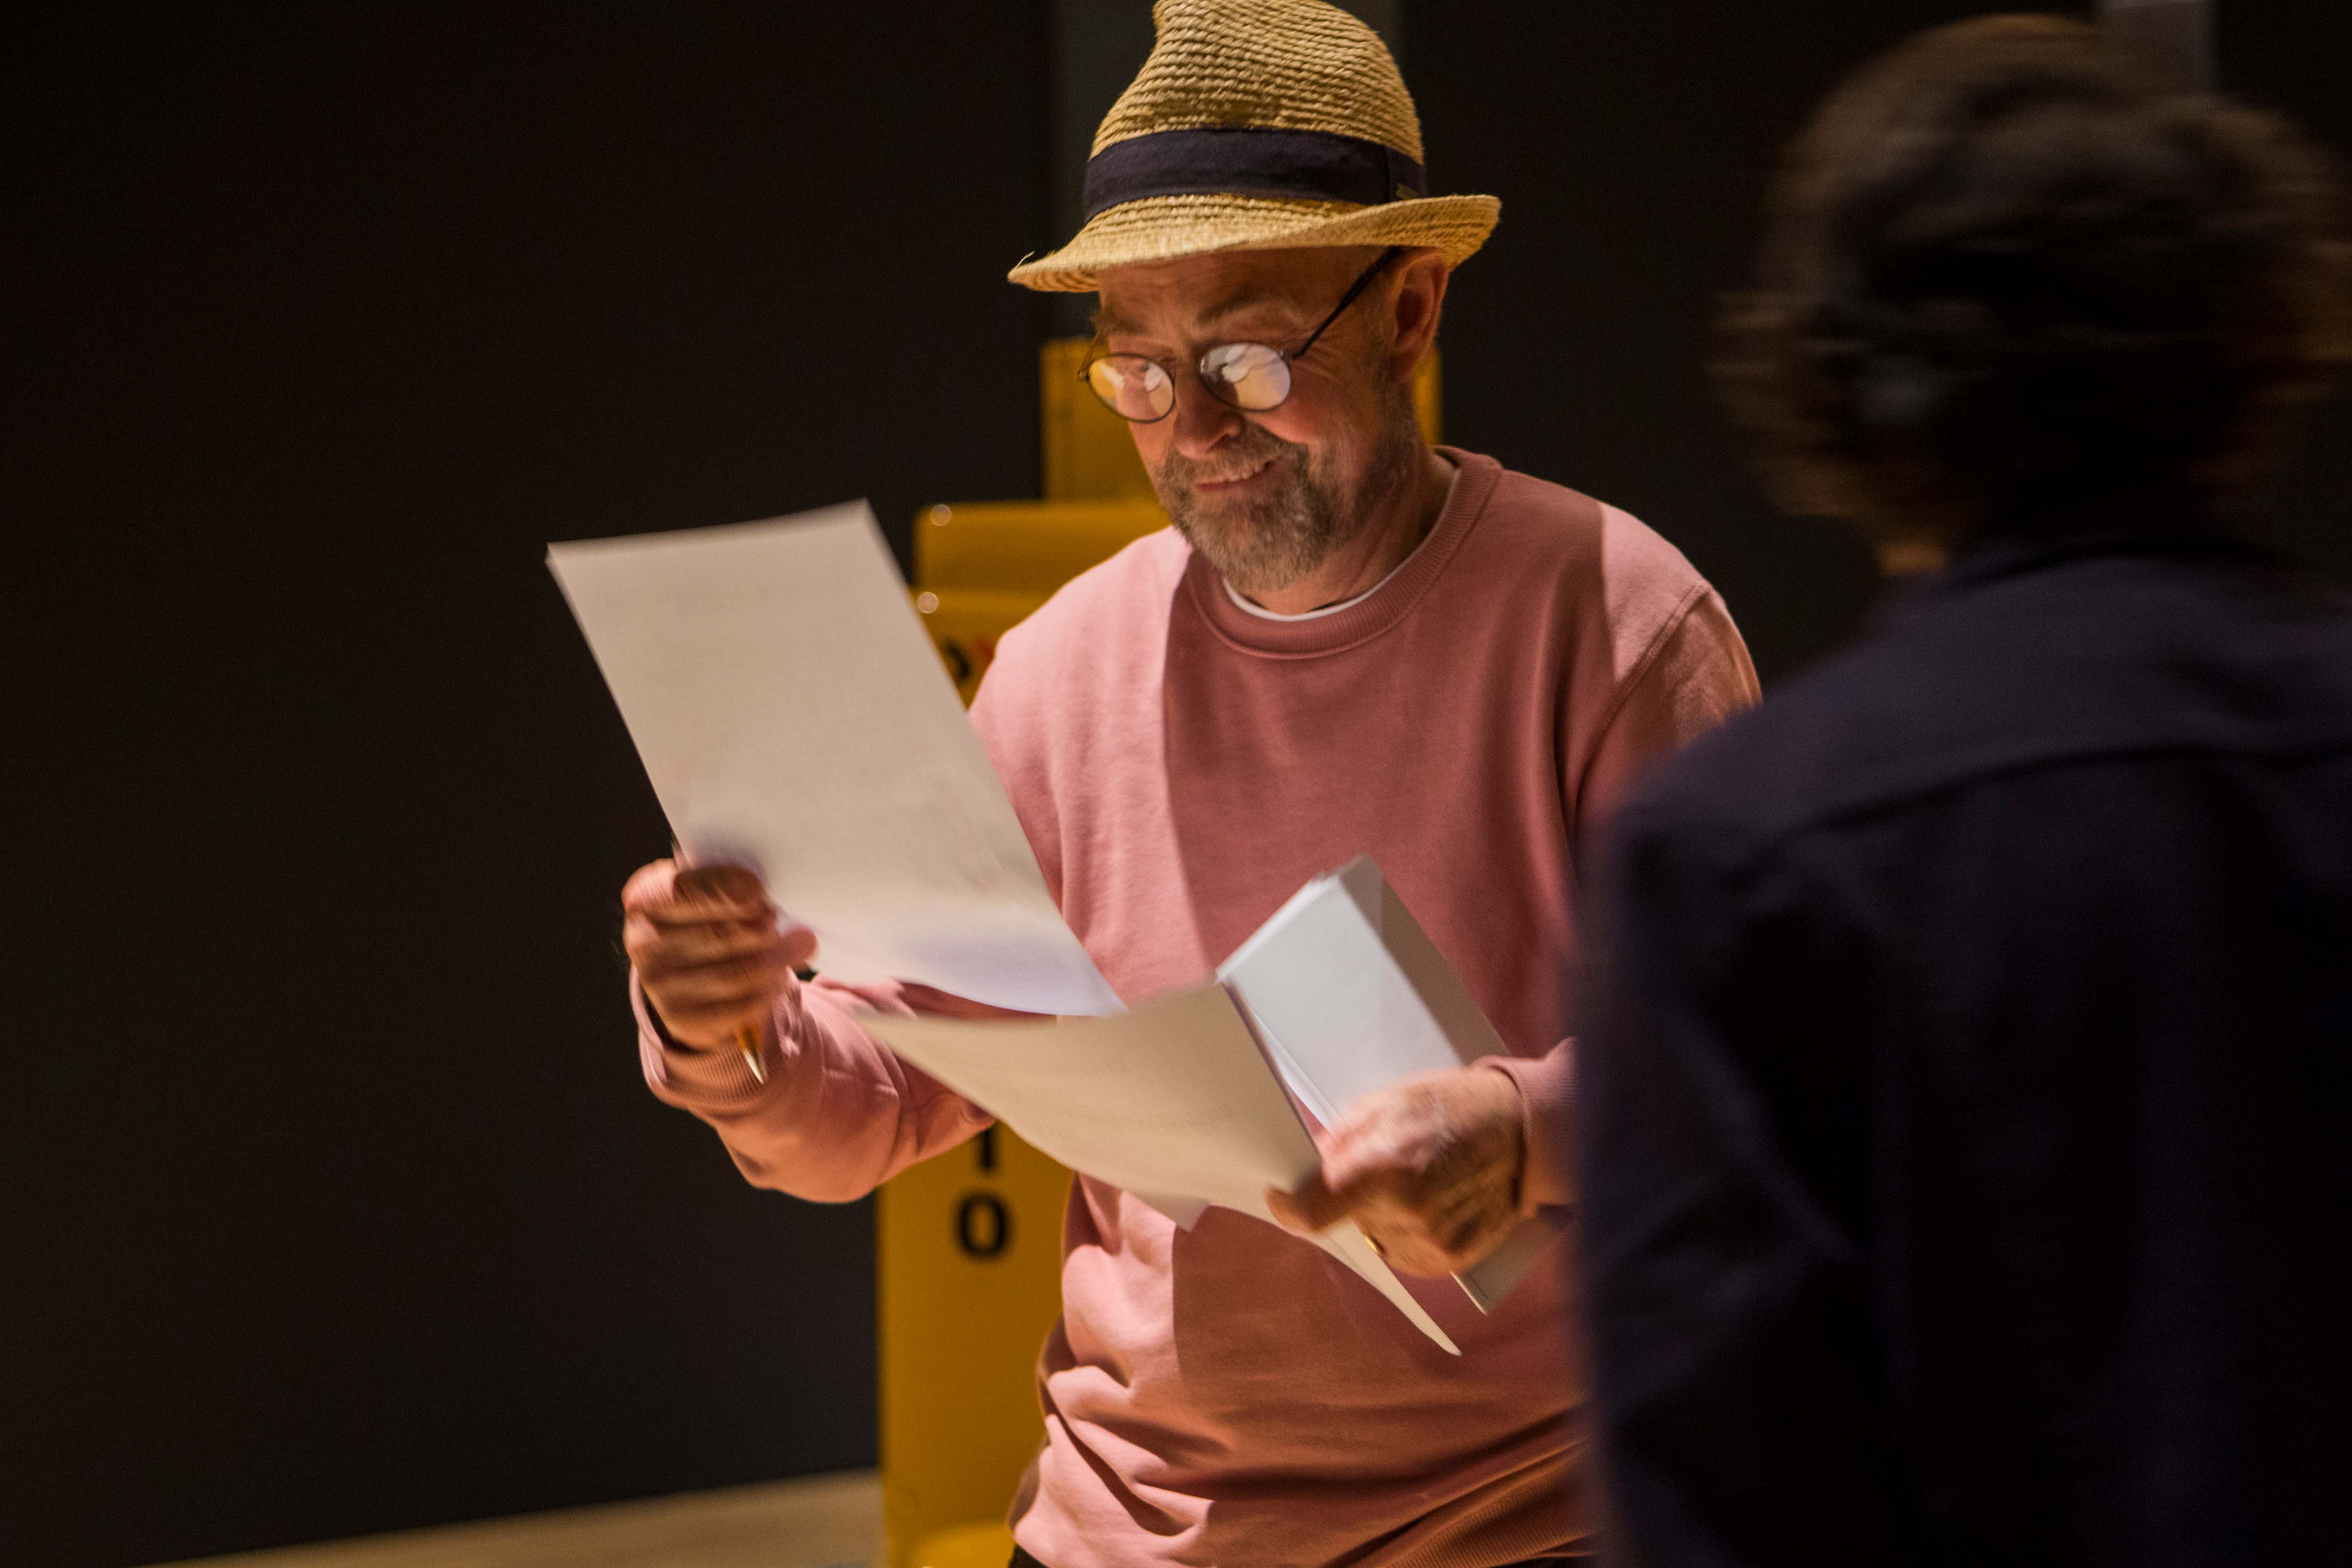 A photograph of sculptor and former Len Lye Foundation Director Evan Webb, during the install of an exhibition of Len's work at the Museum Tinguely in Basel, Switzerland, in 2019.